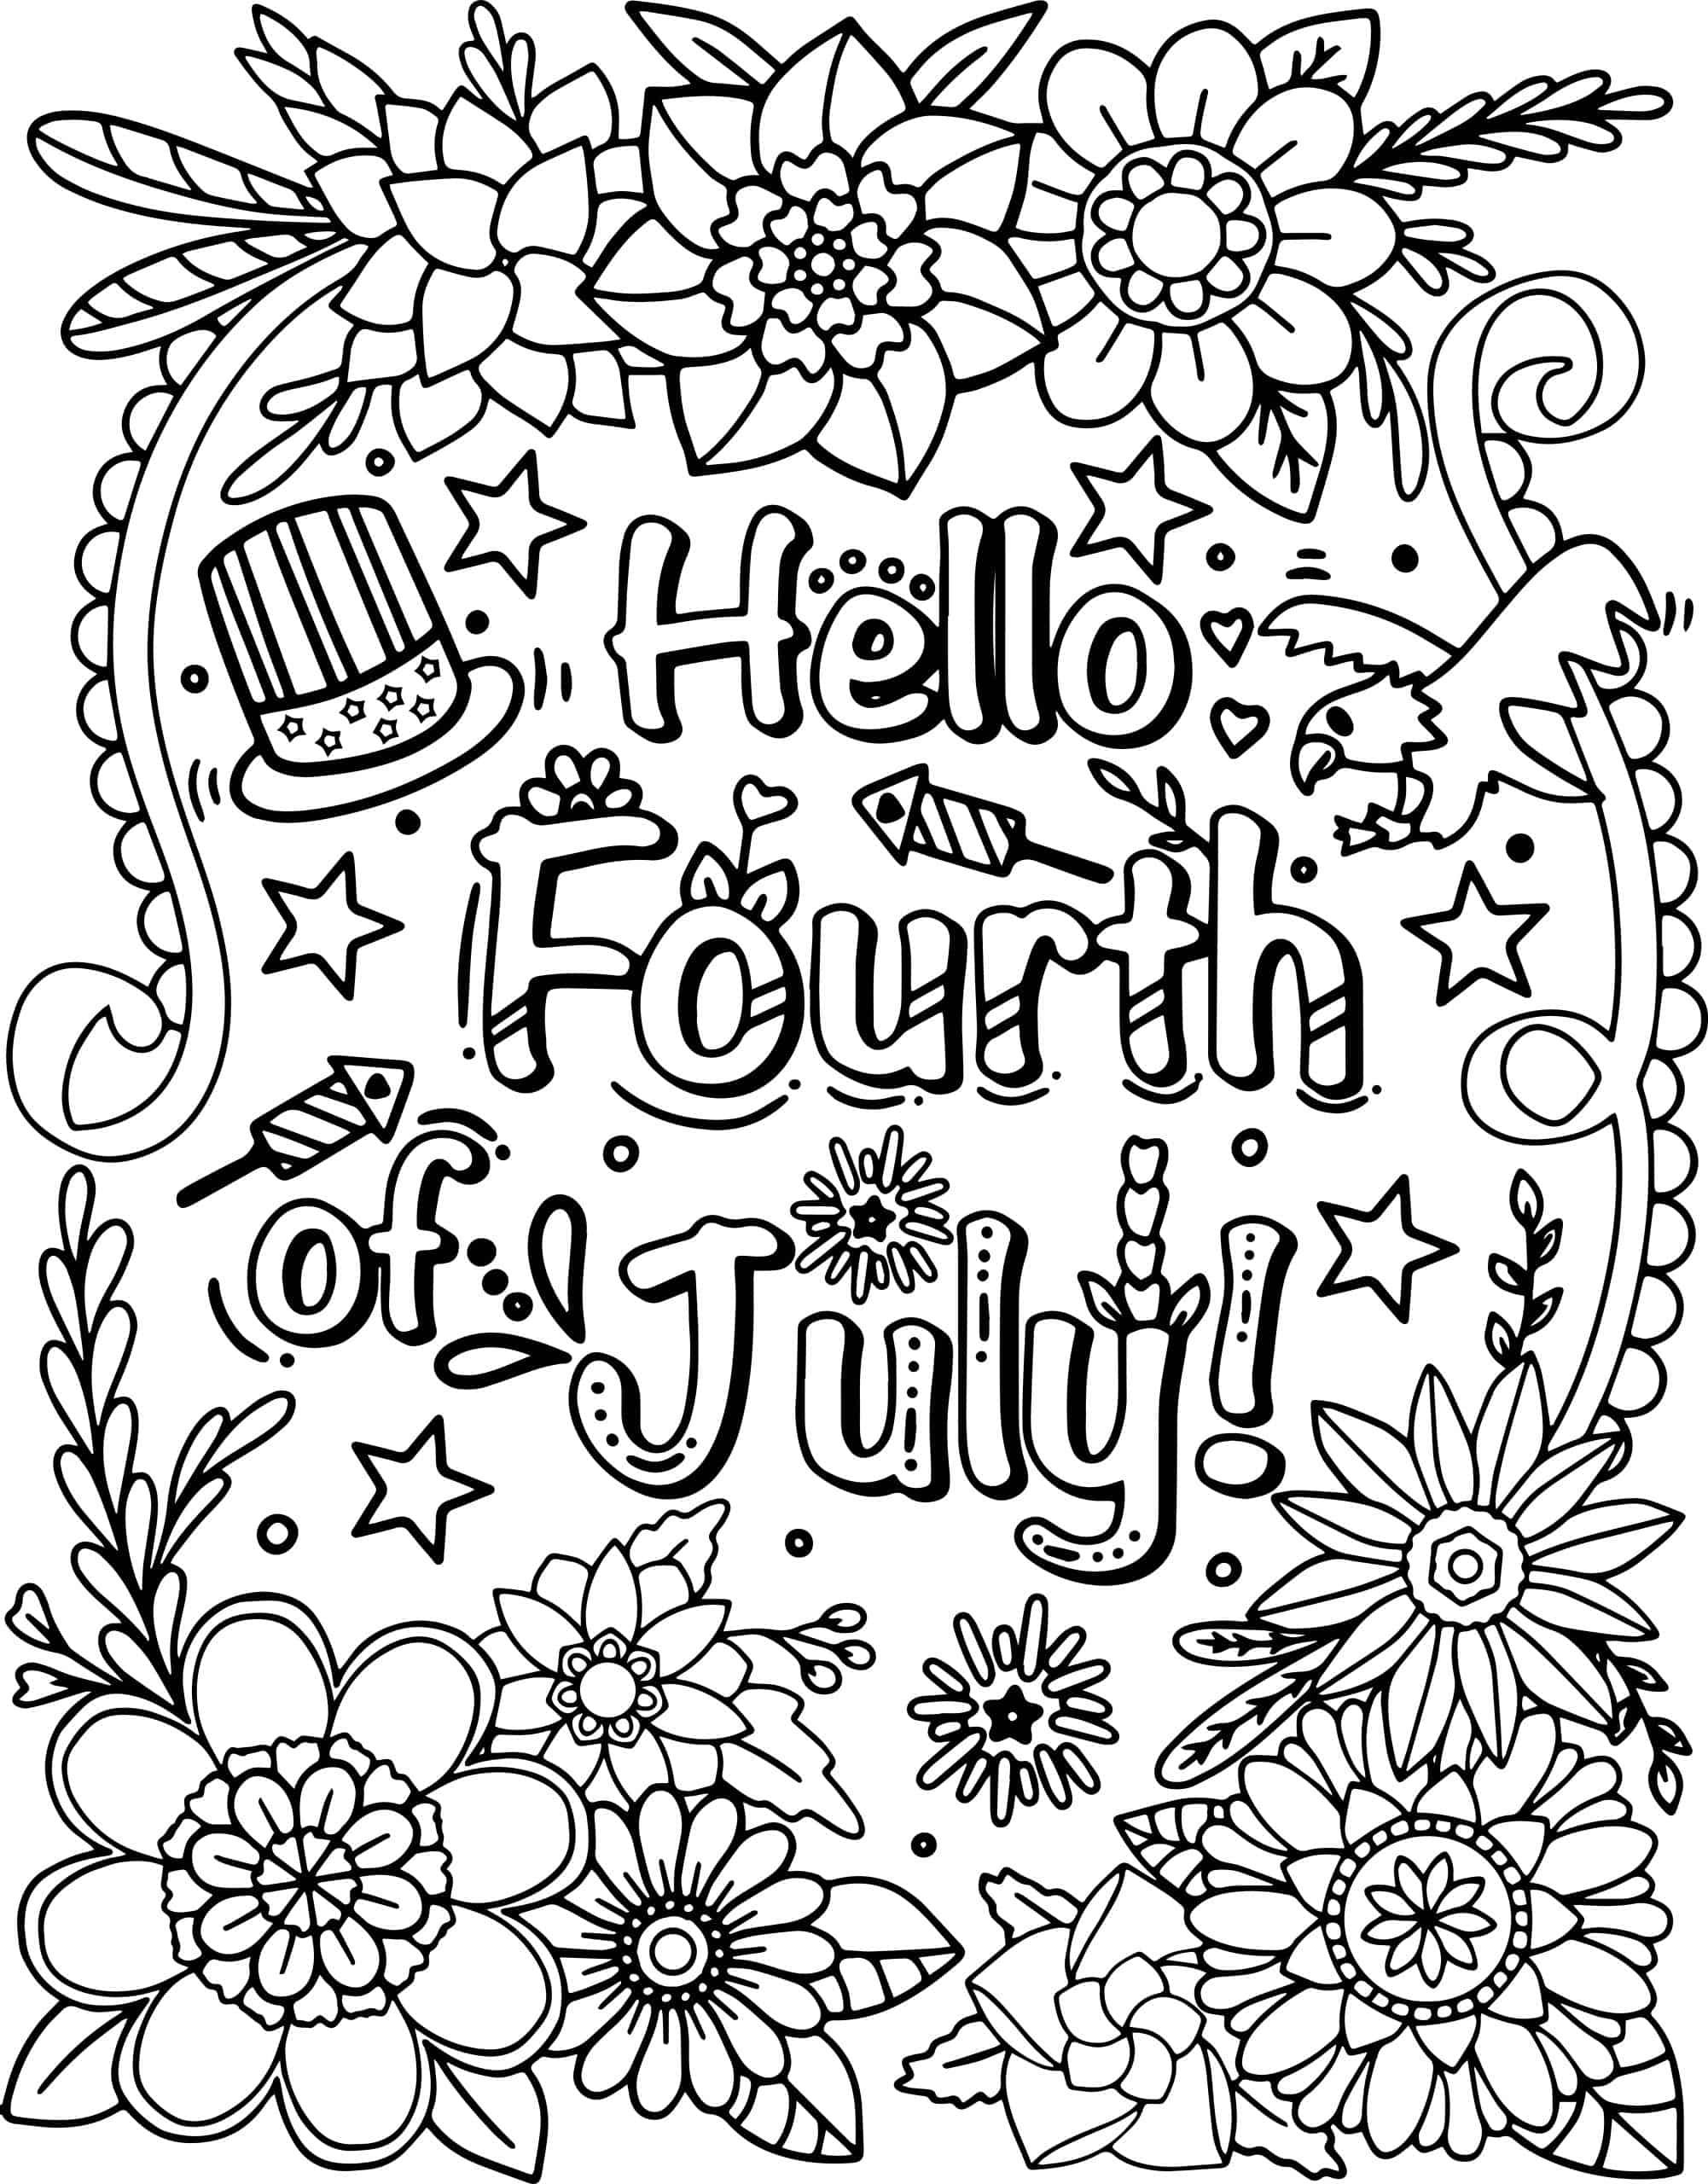 Celebrate Freedom with 4th of July: 180+ Free Coloring Pages 104